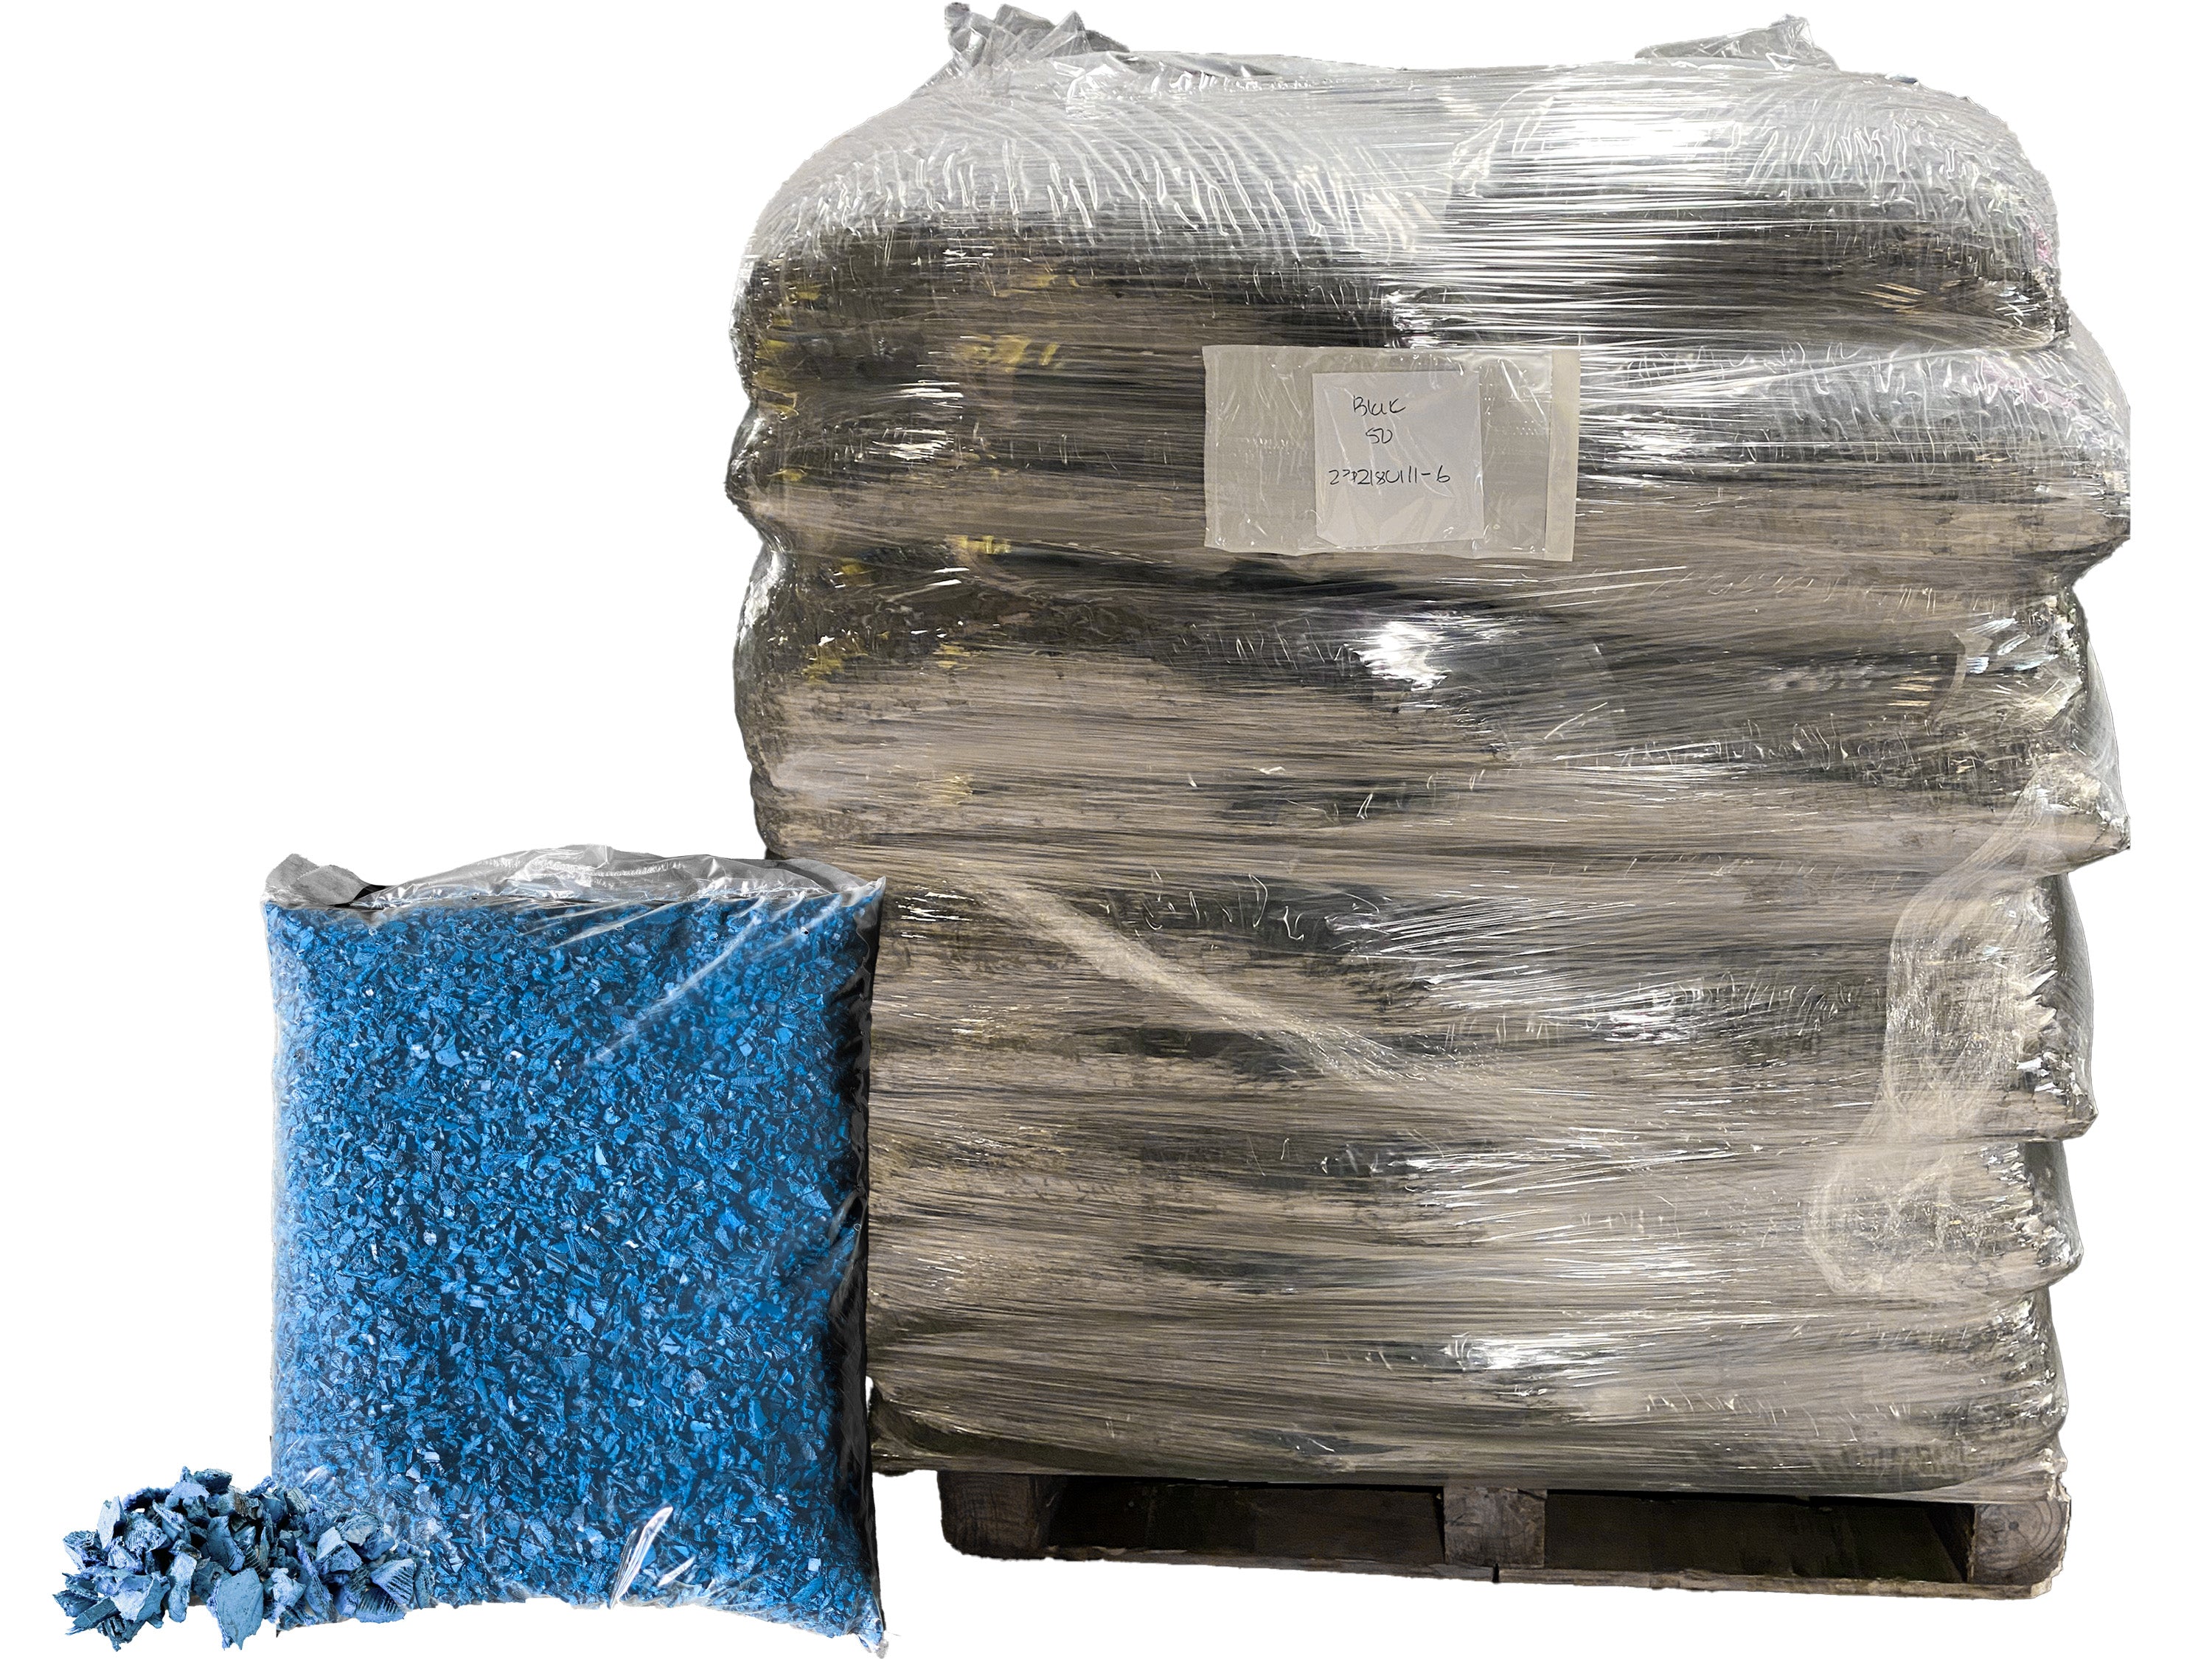 Viagrow Blue Rubber Playground & Landscape Mulch, 75 cf pallet / 50 bags 1.5cf each / 2.77 Cubic Yards / 2000lbs